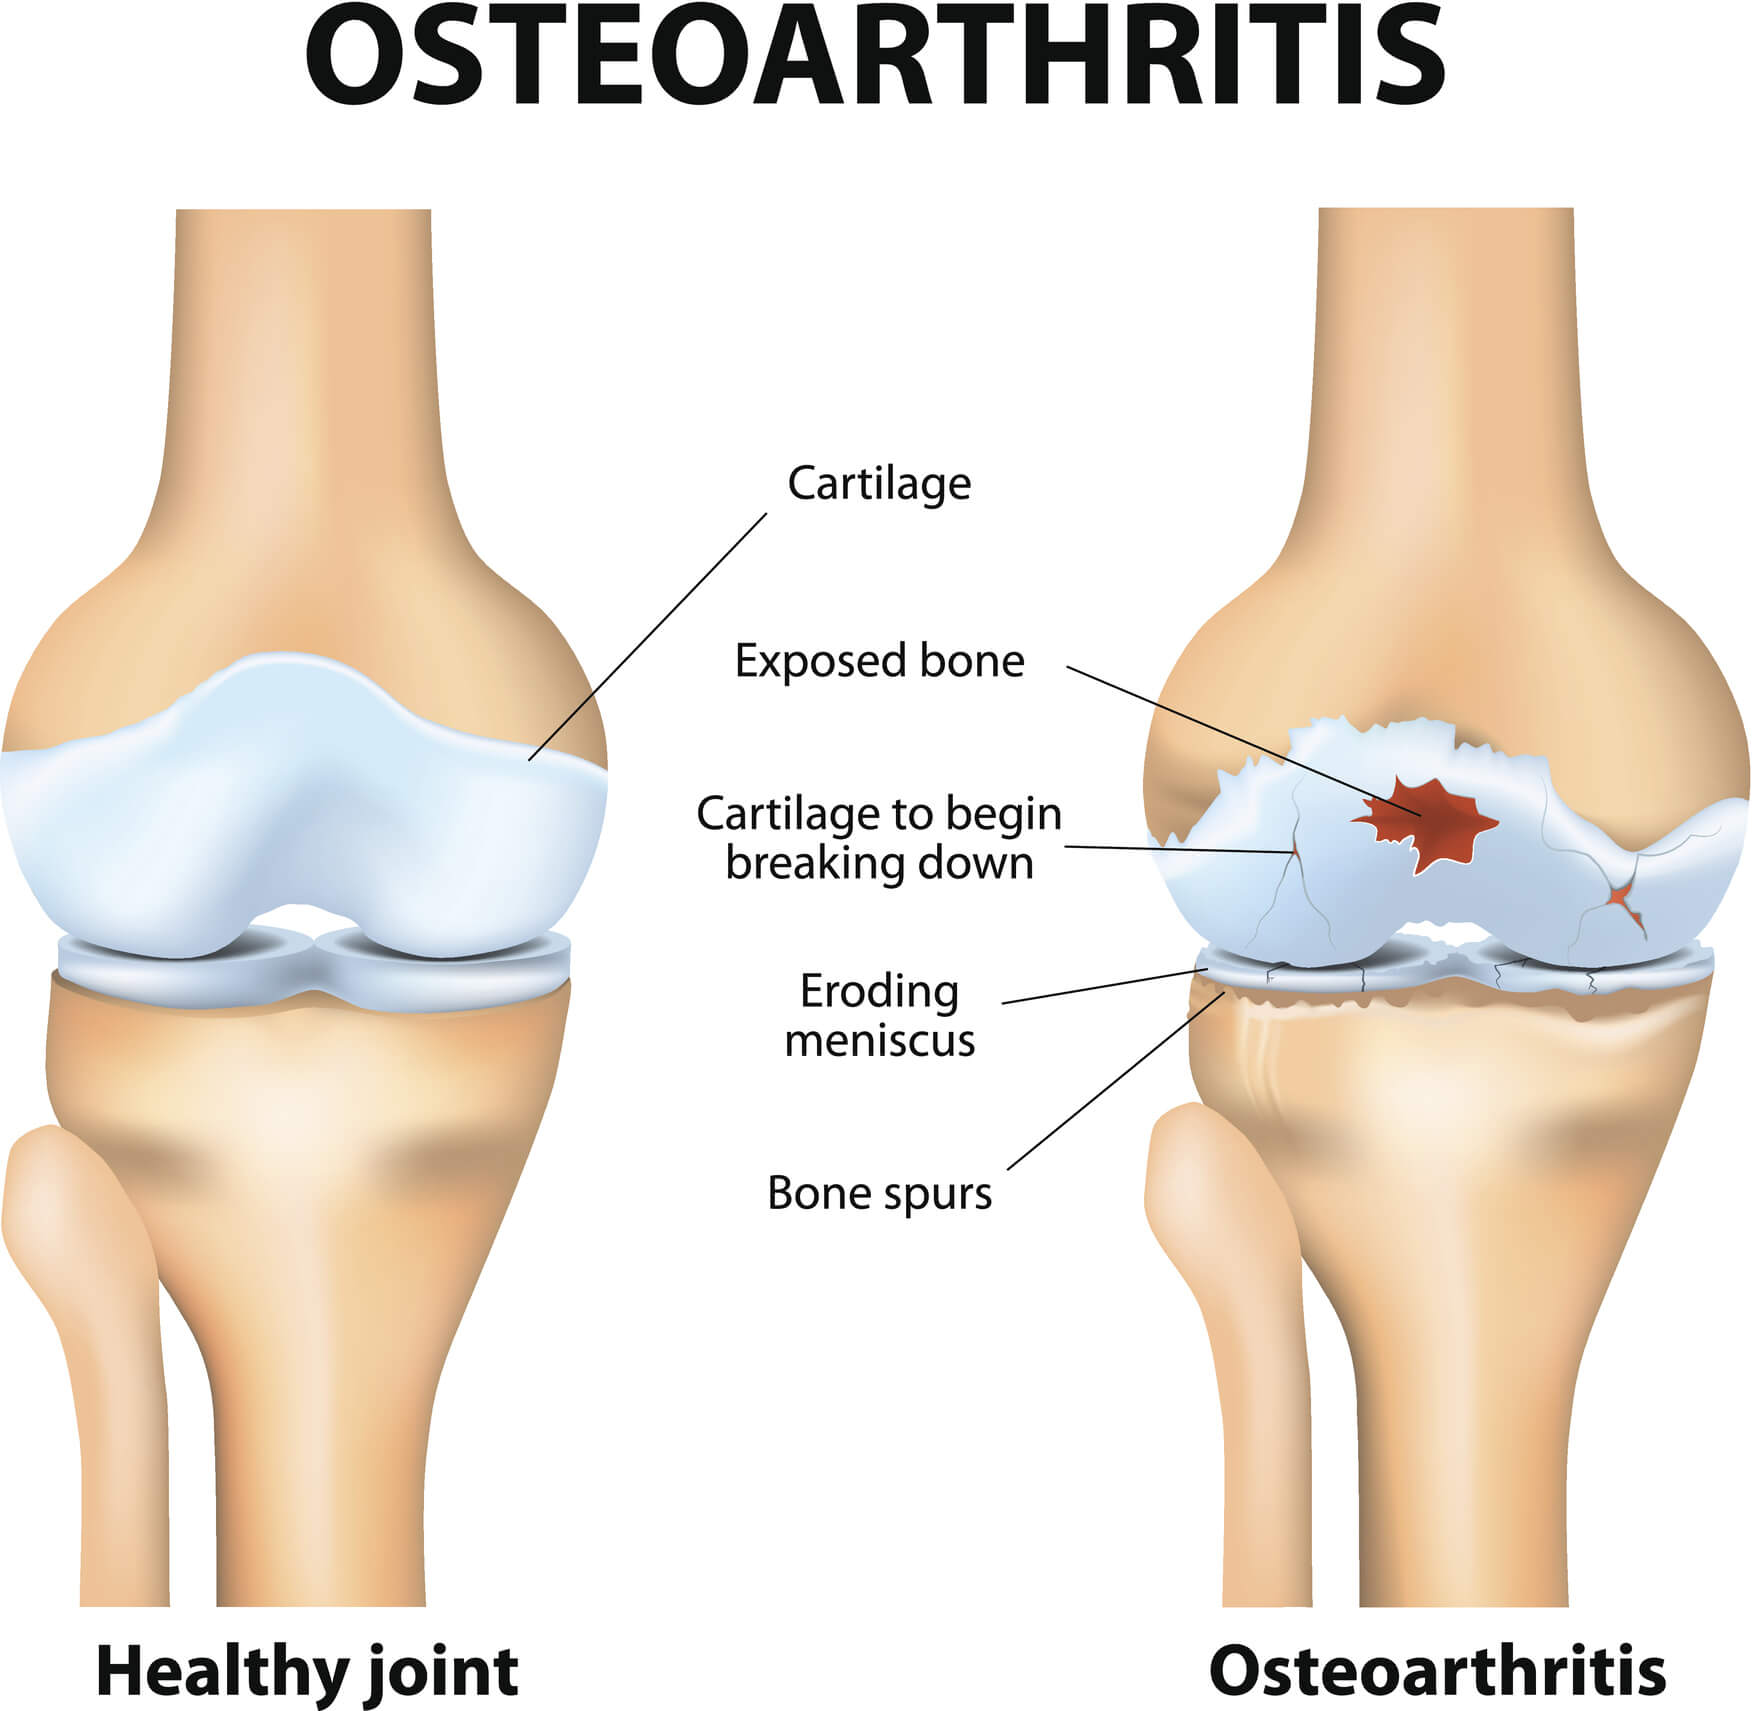 Stop and Reverse Osteoarthritis by Following These 2 Simple Tips